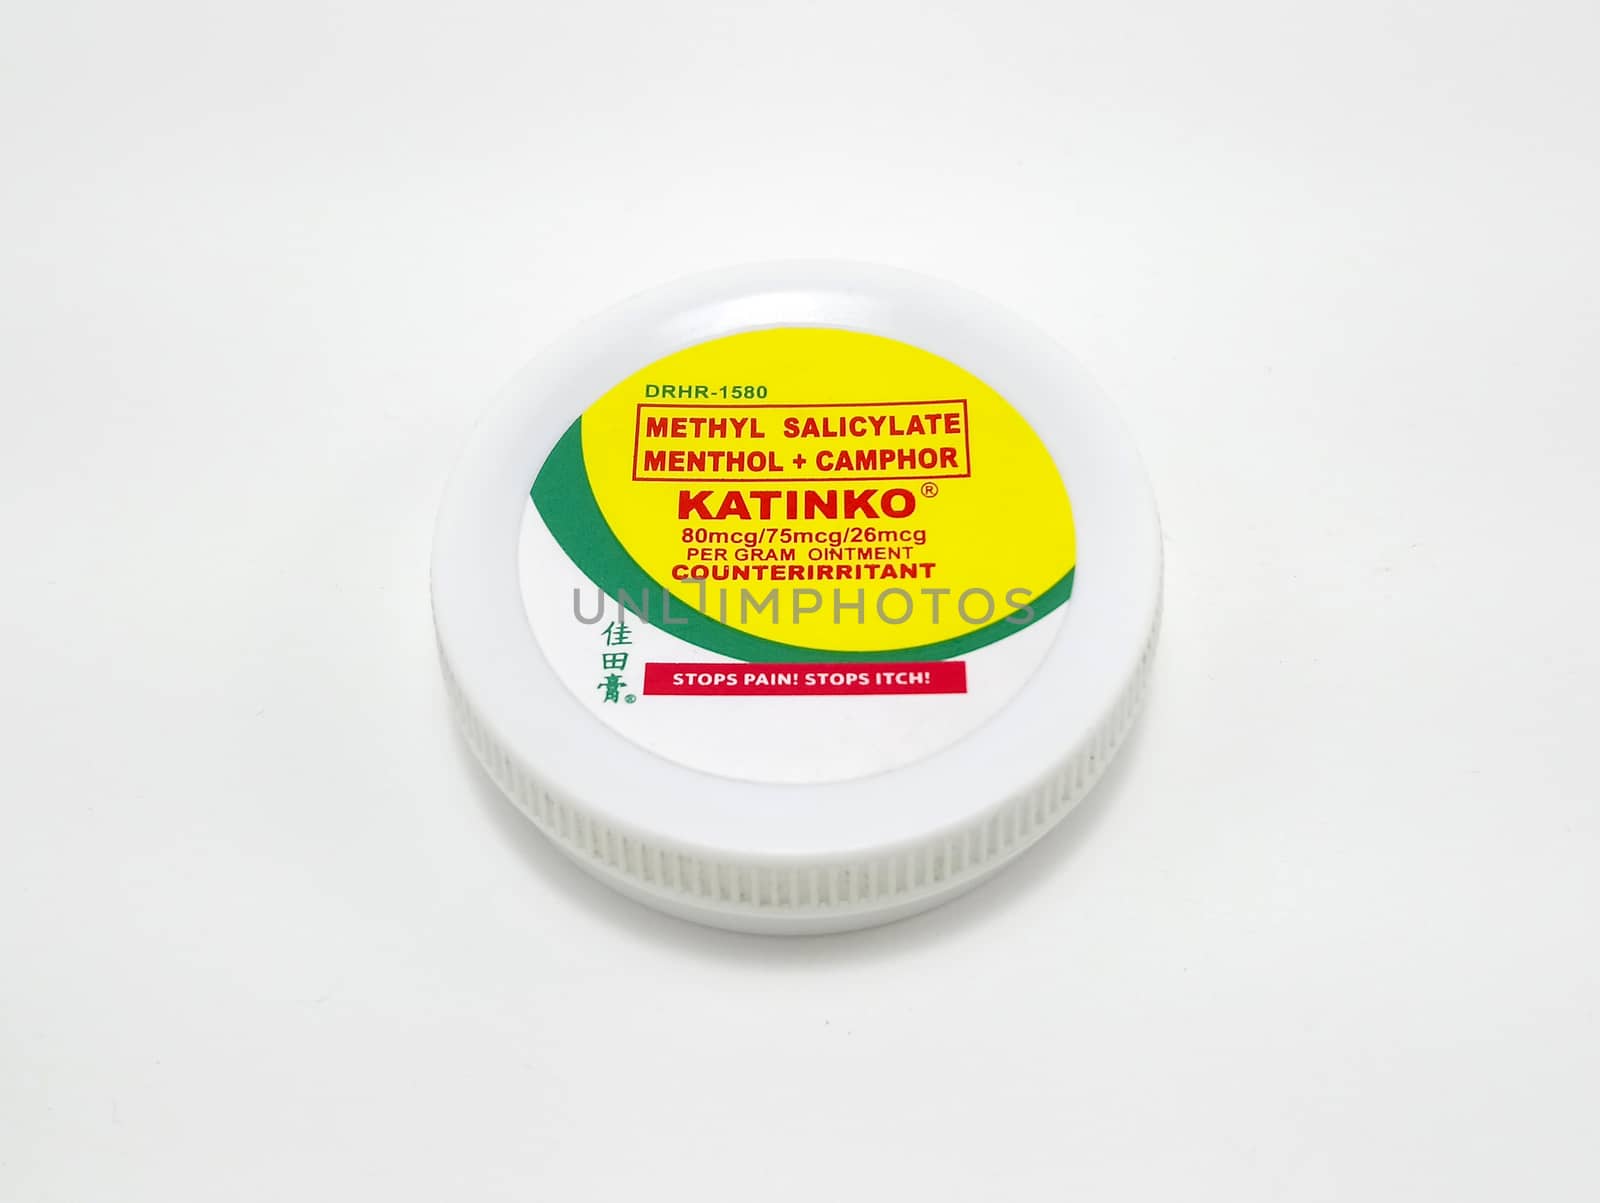 Katinko counterirritant ointment in Manila, Philippines by imwaltersy